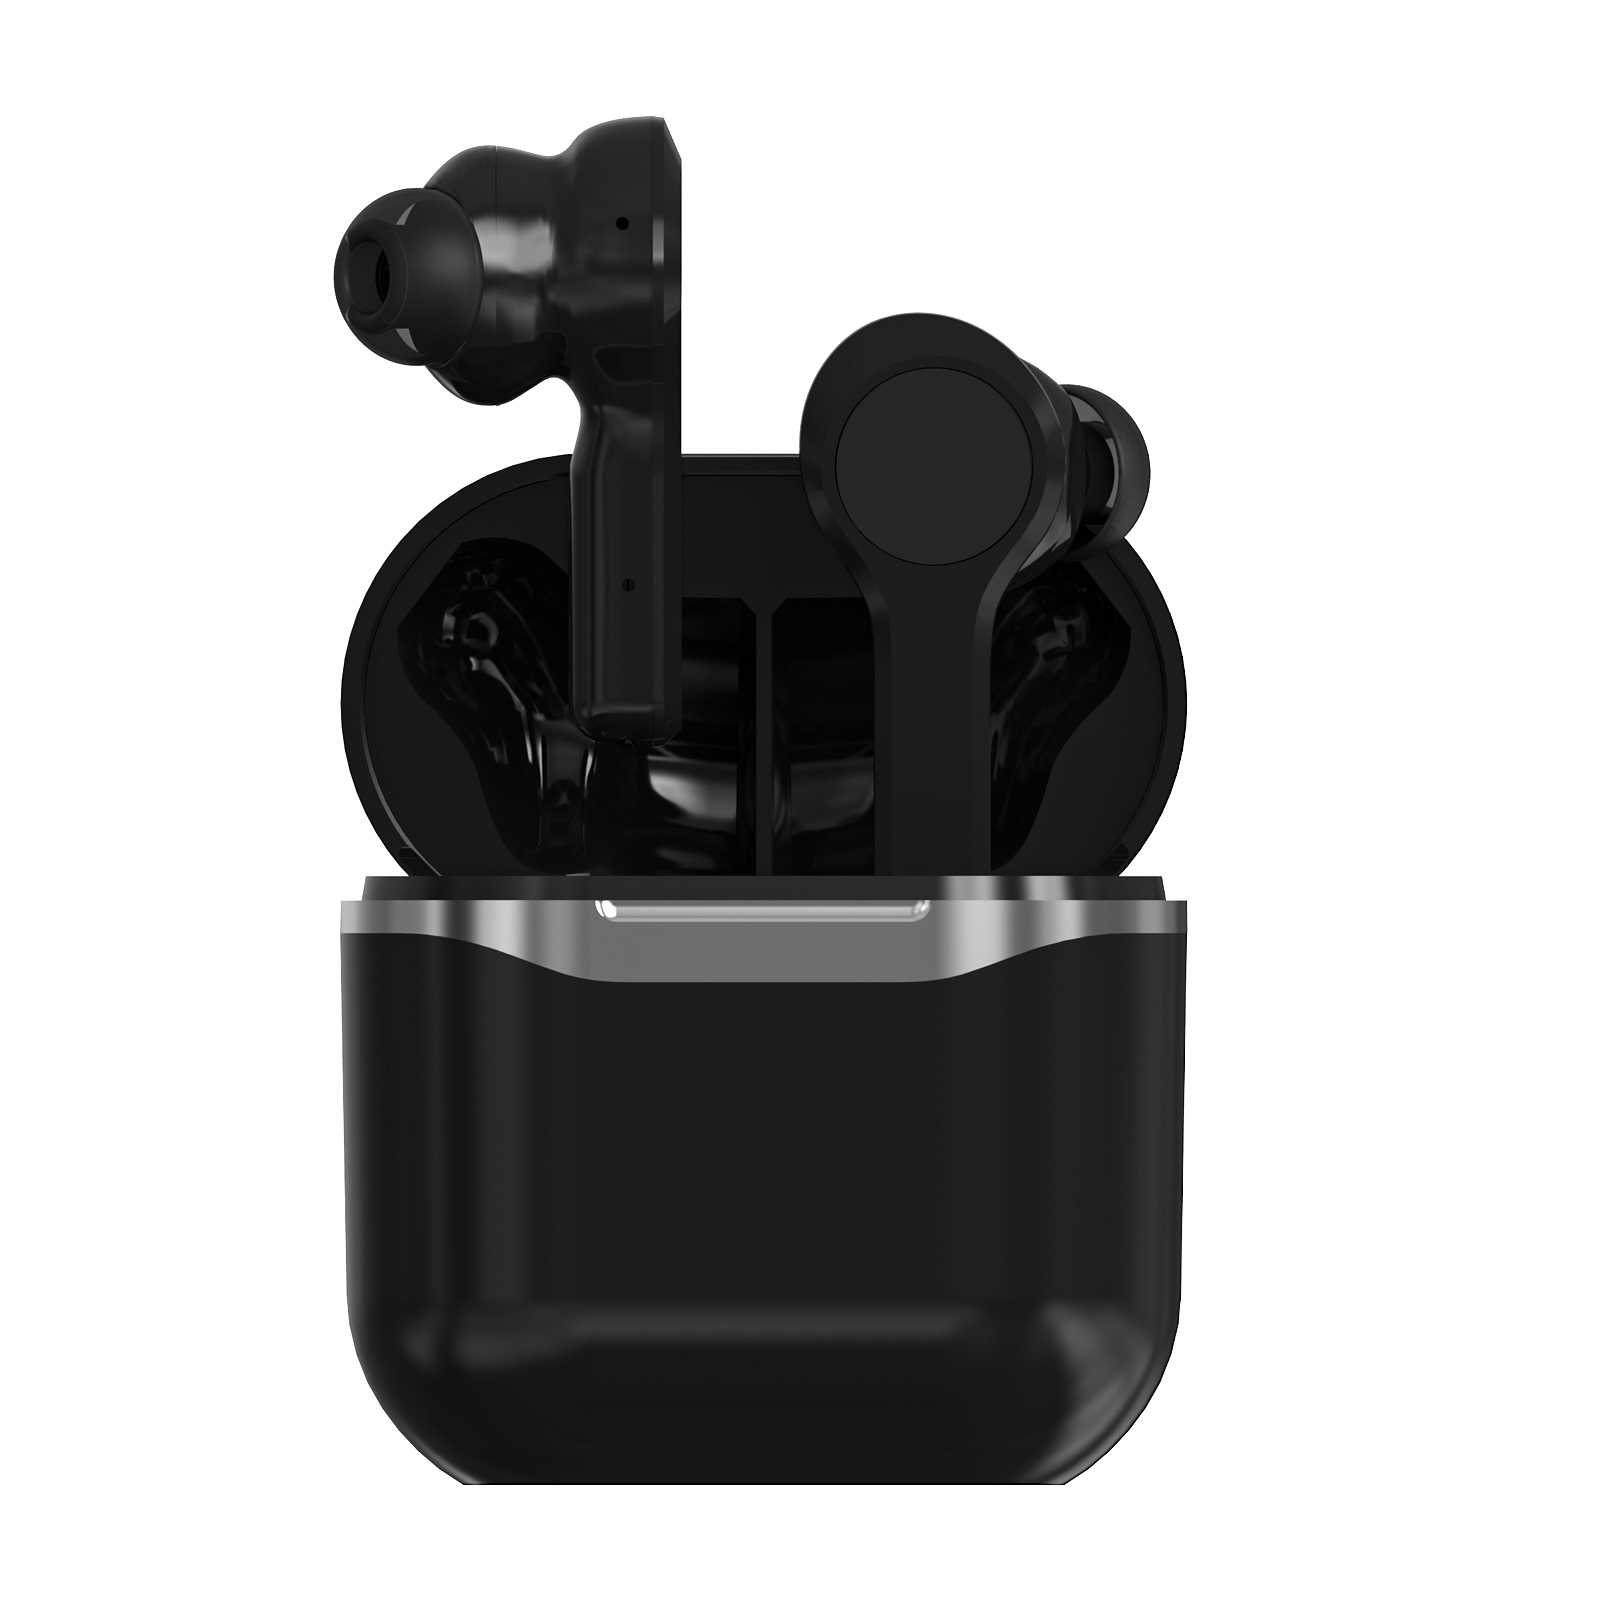 True Wireless Earbuds with Active Noise Canceling, Black